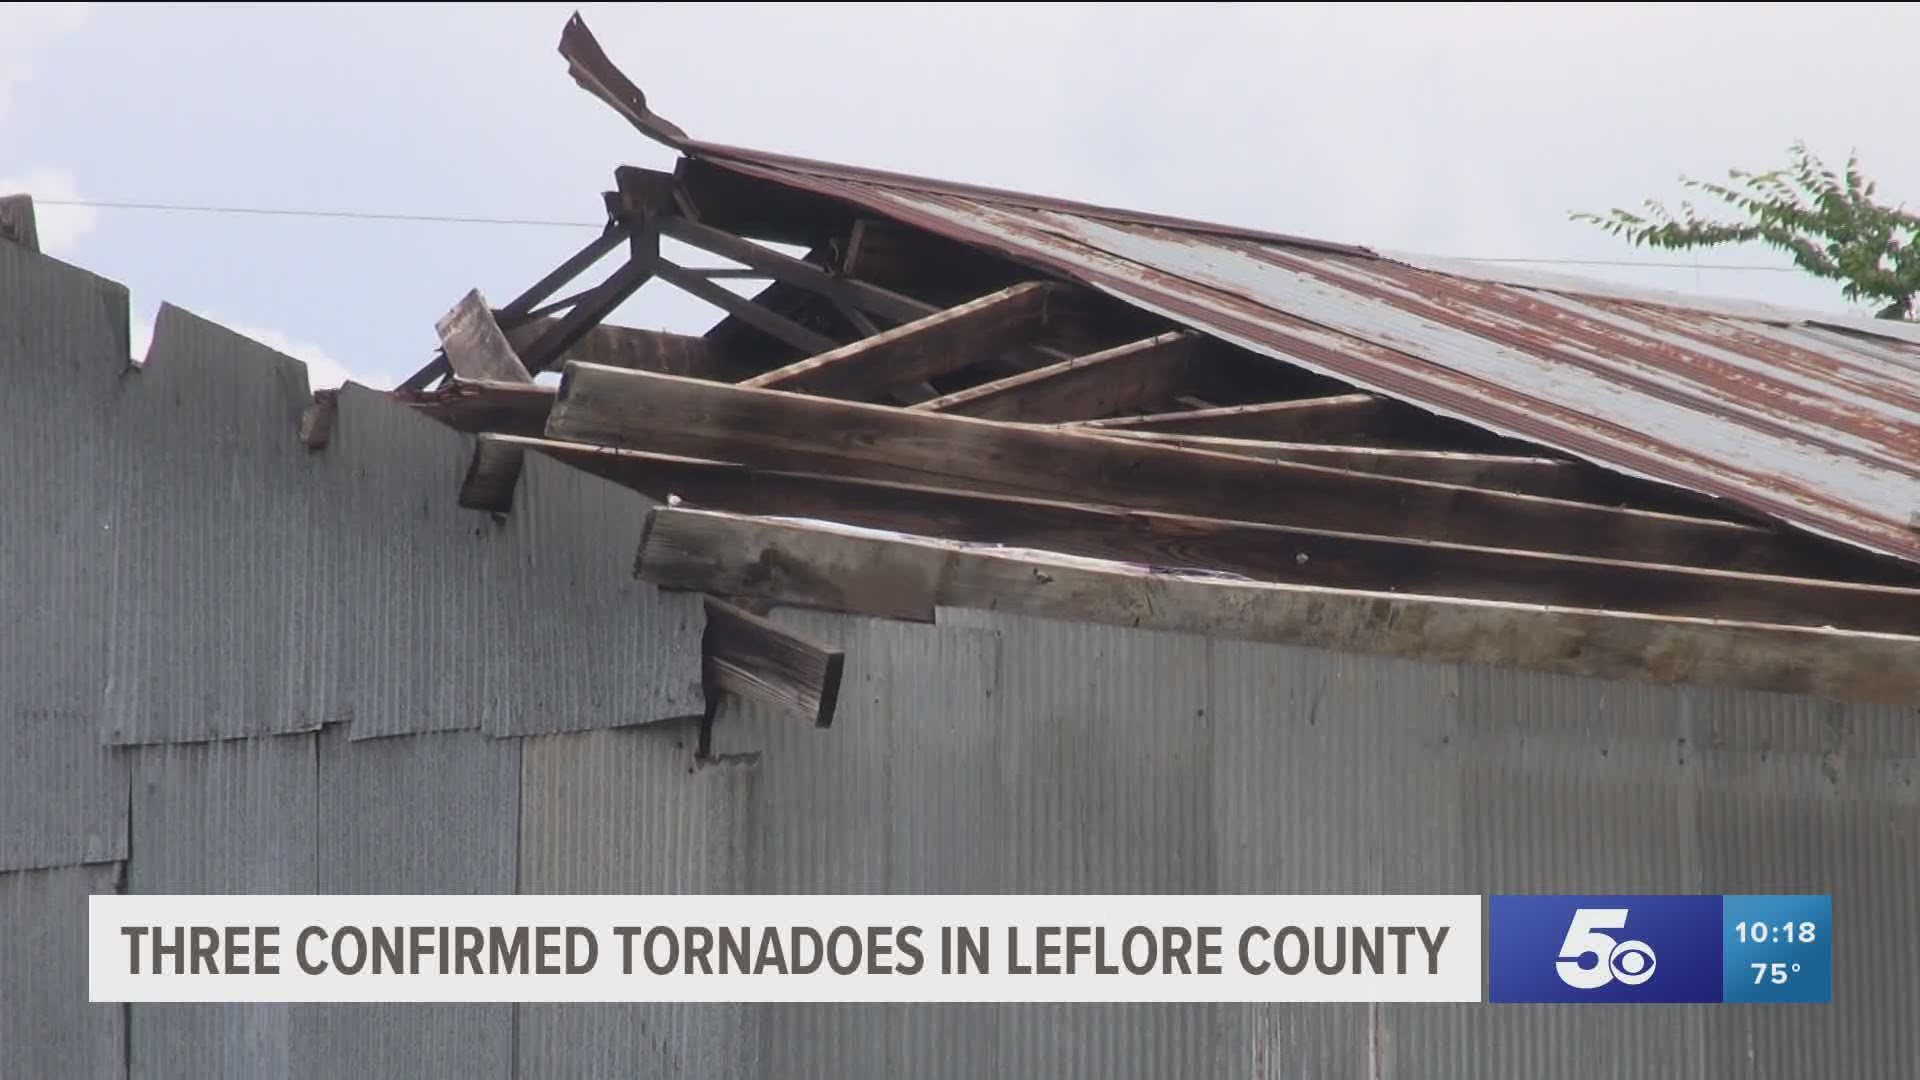 Tornadoes in LeFlore County.